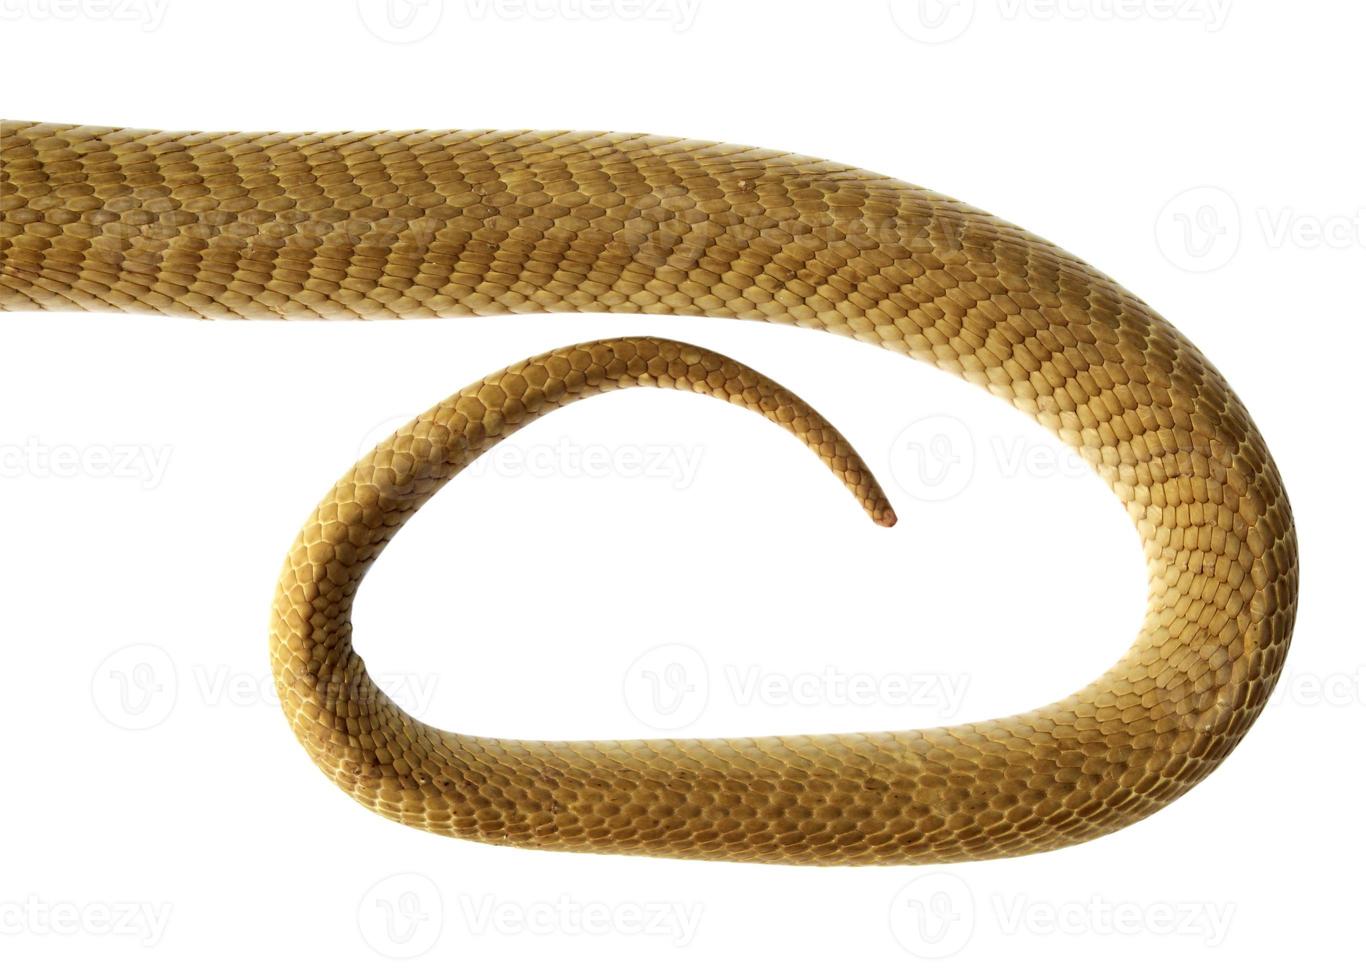 The tail of a snake on a white background. photo